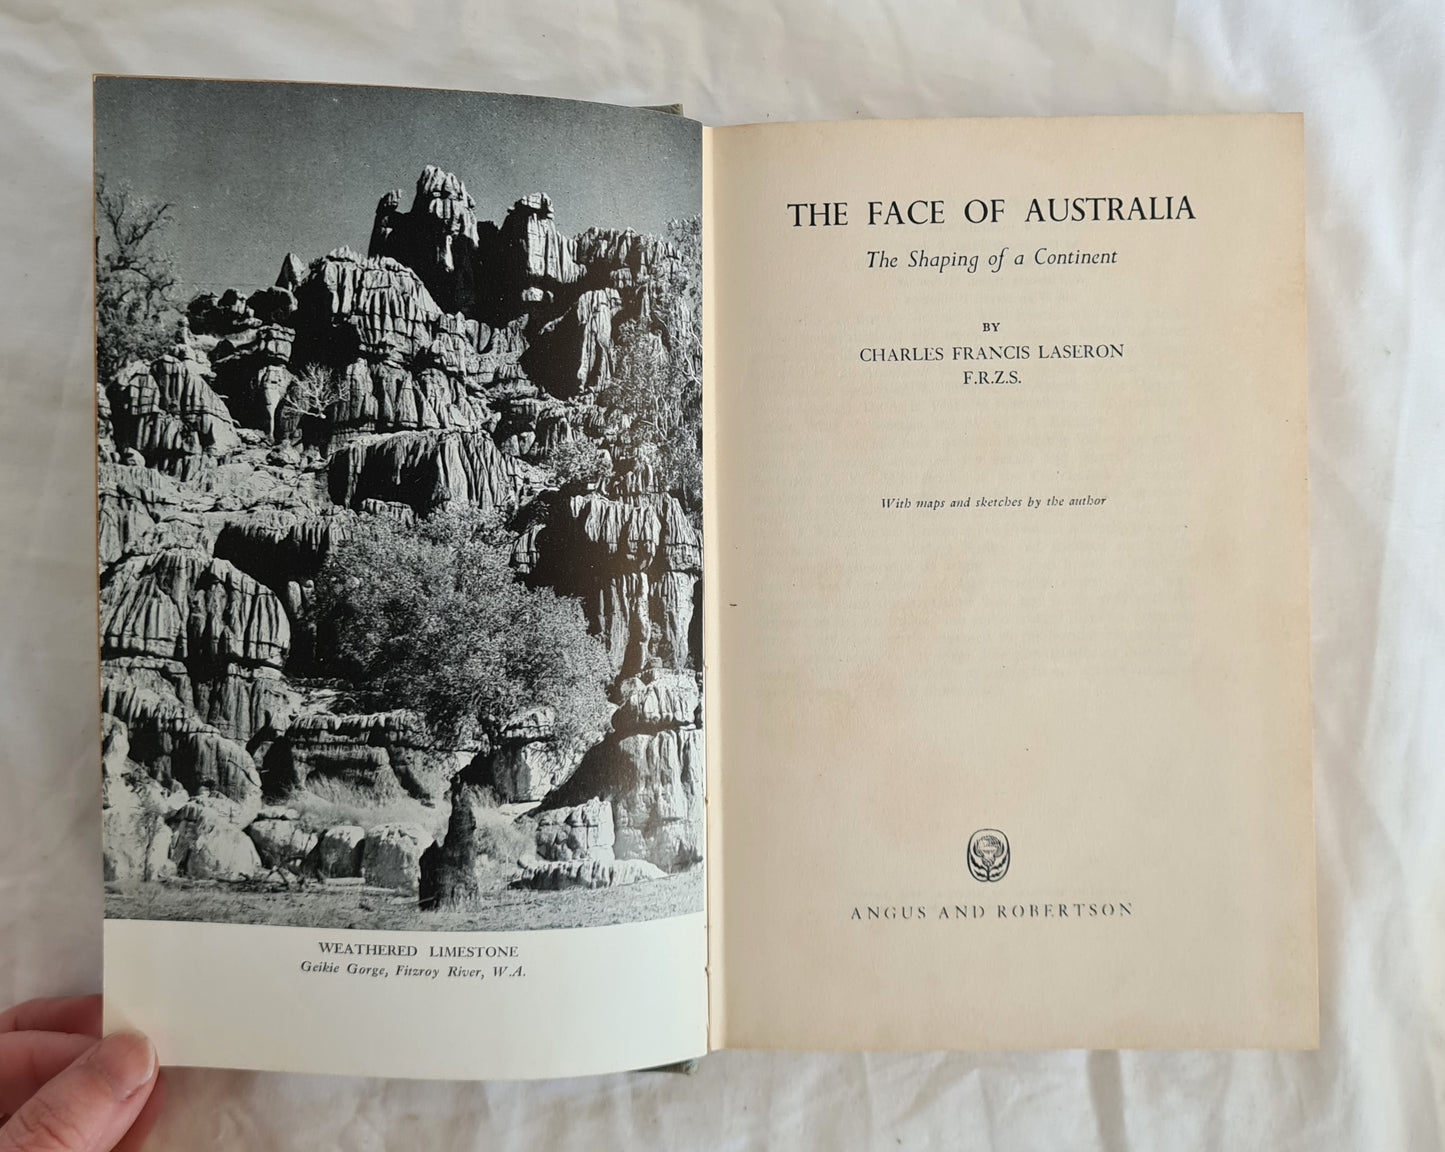 The Face of Australia  The Shaping of a Continent  by Charles Francis Laseron